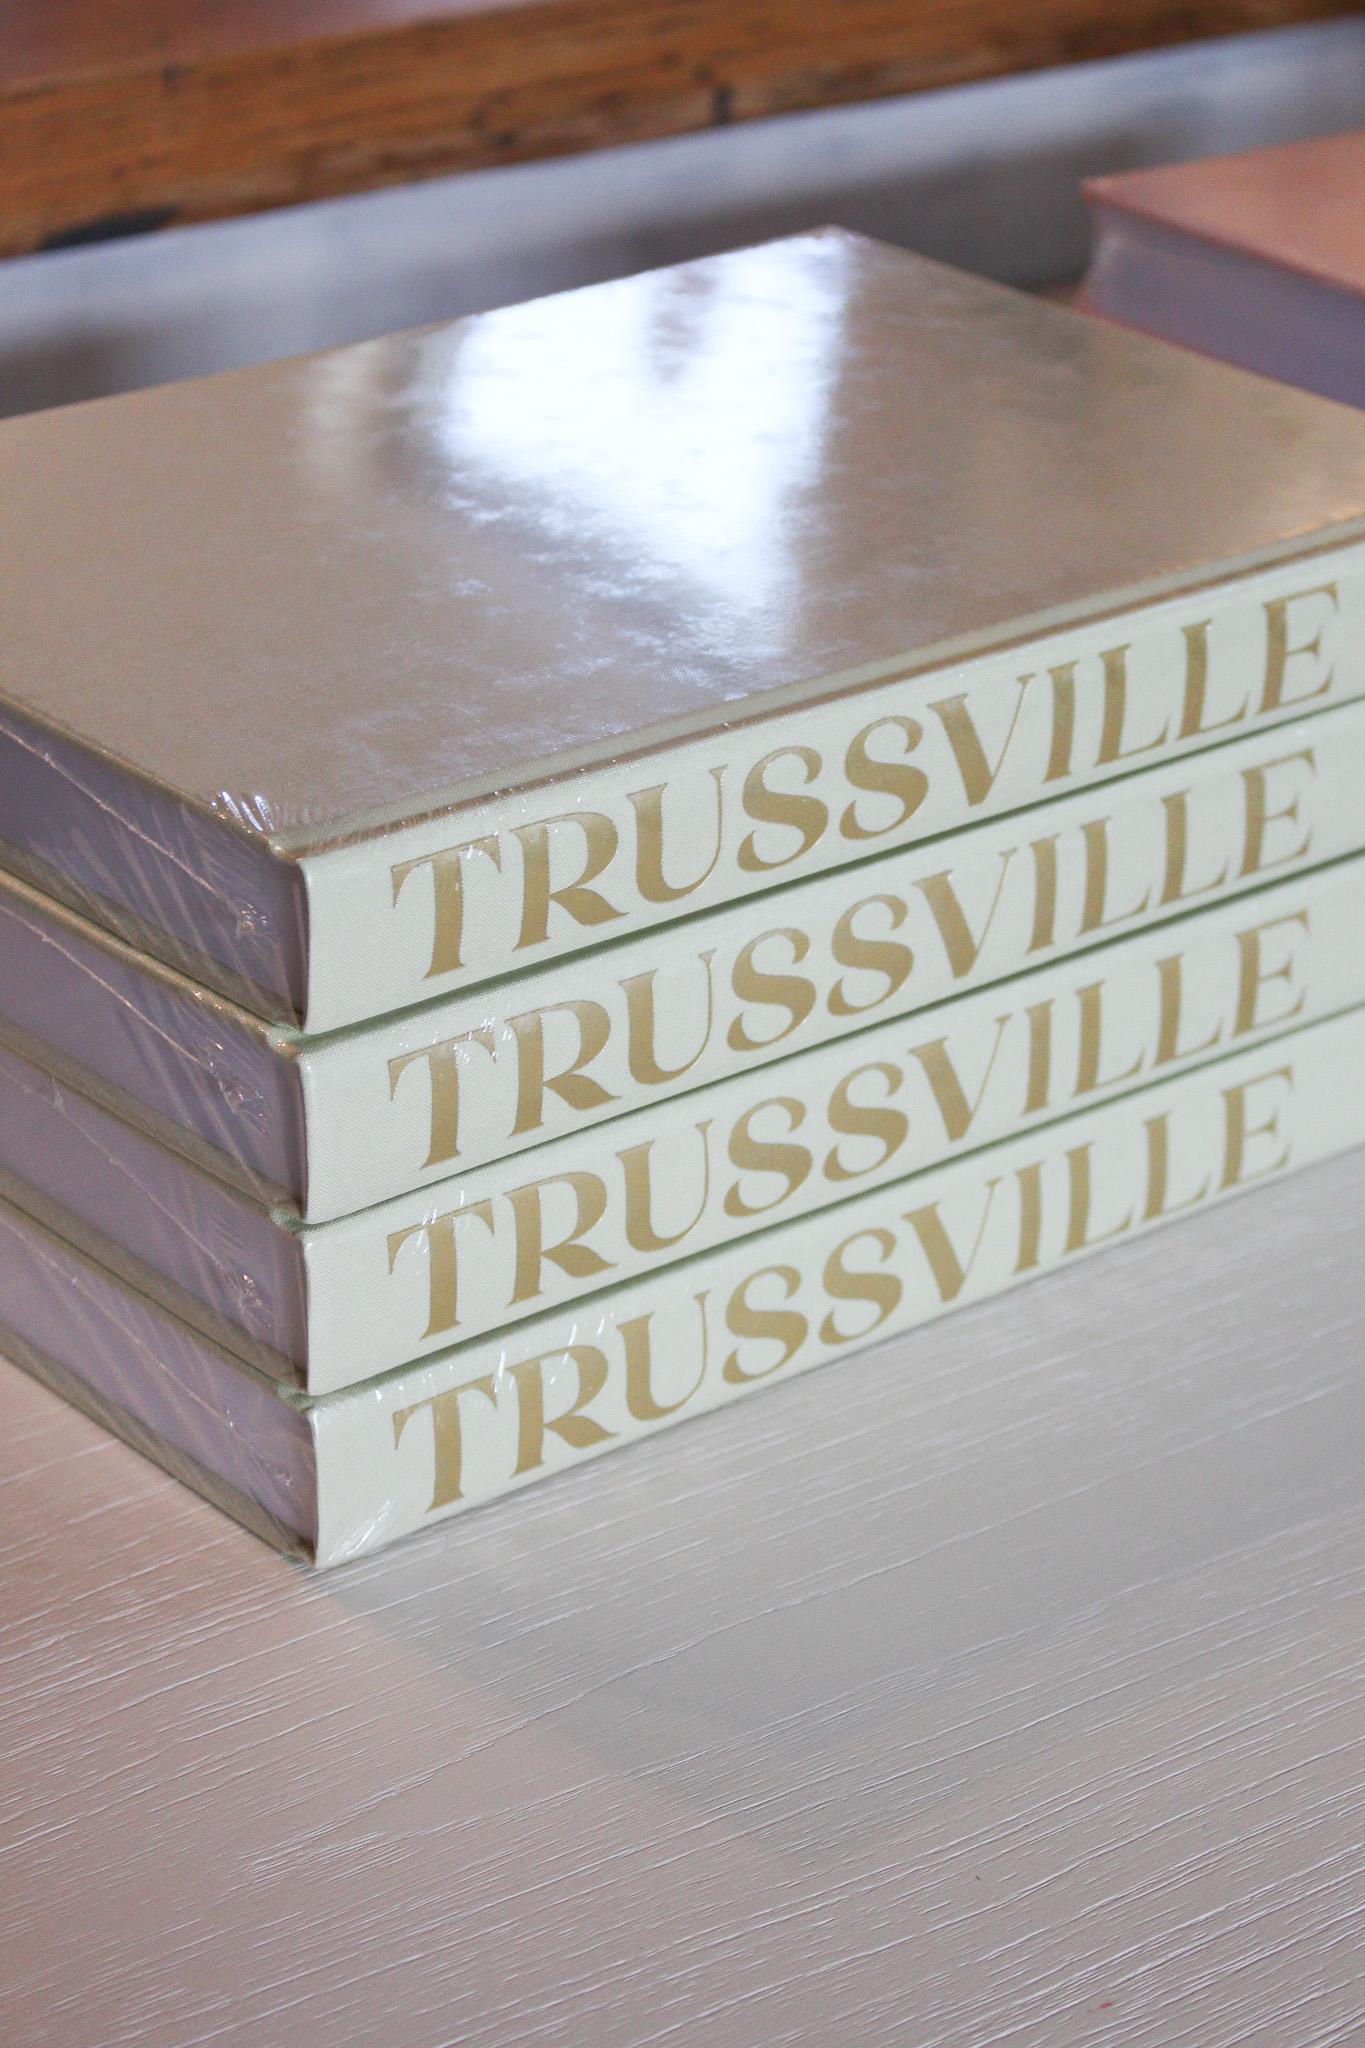 Trussville Coffee Table Book